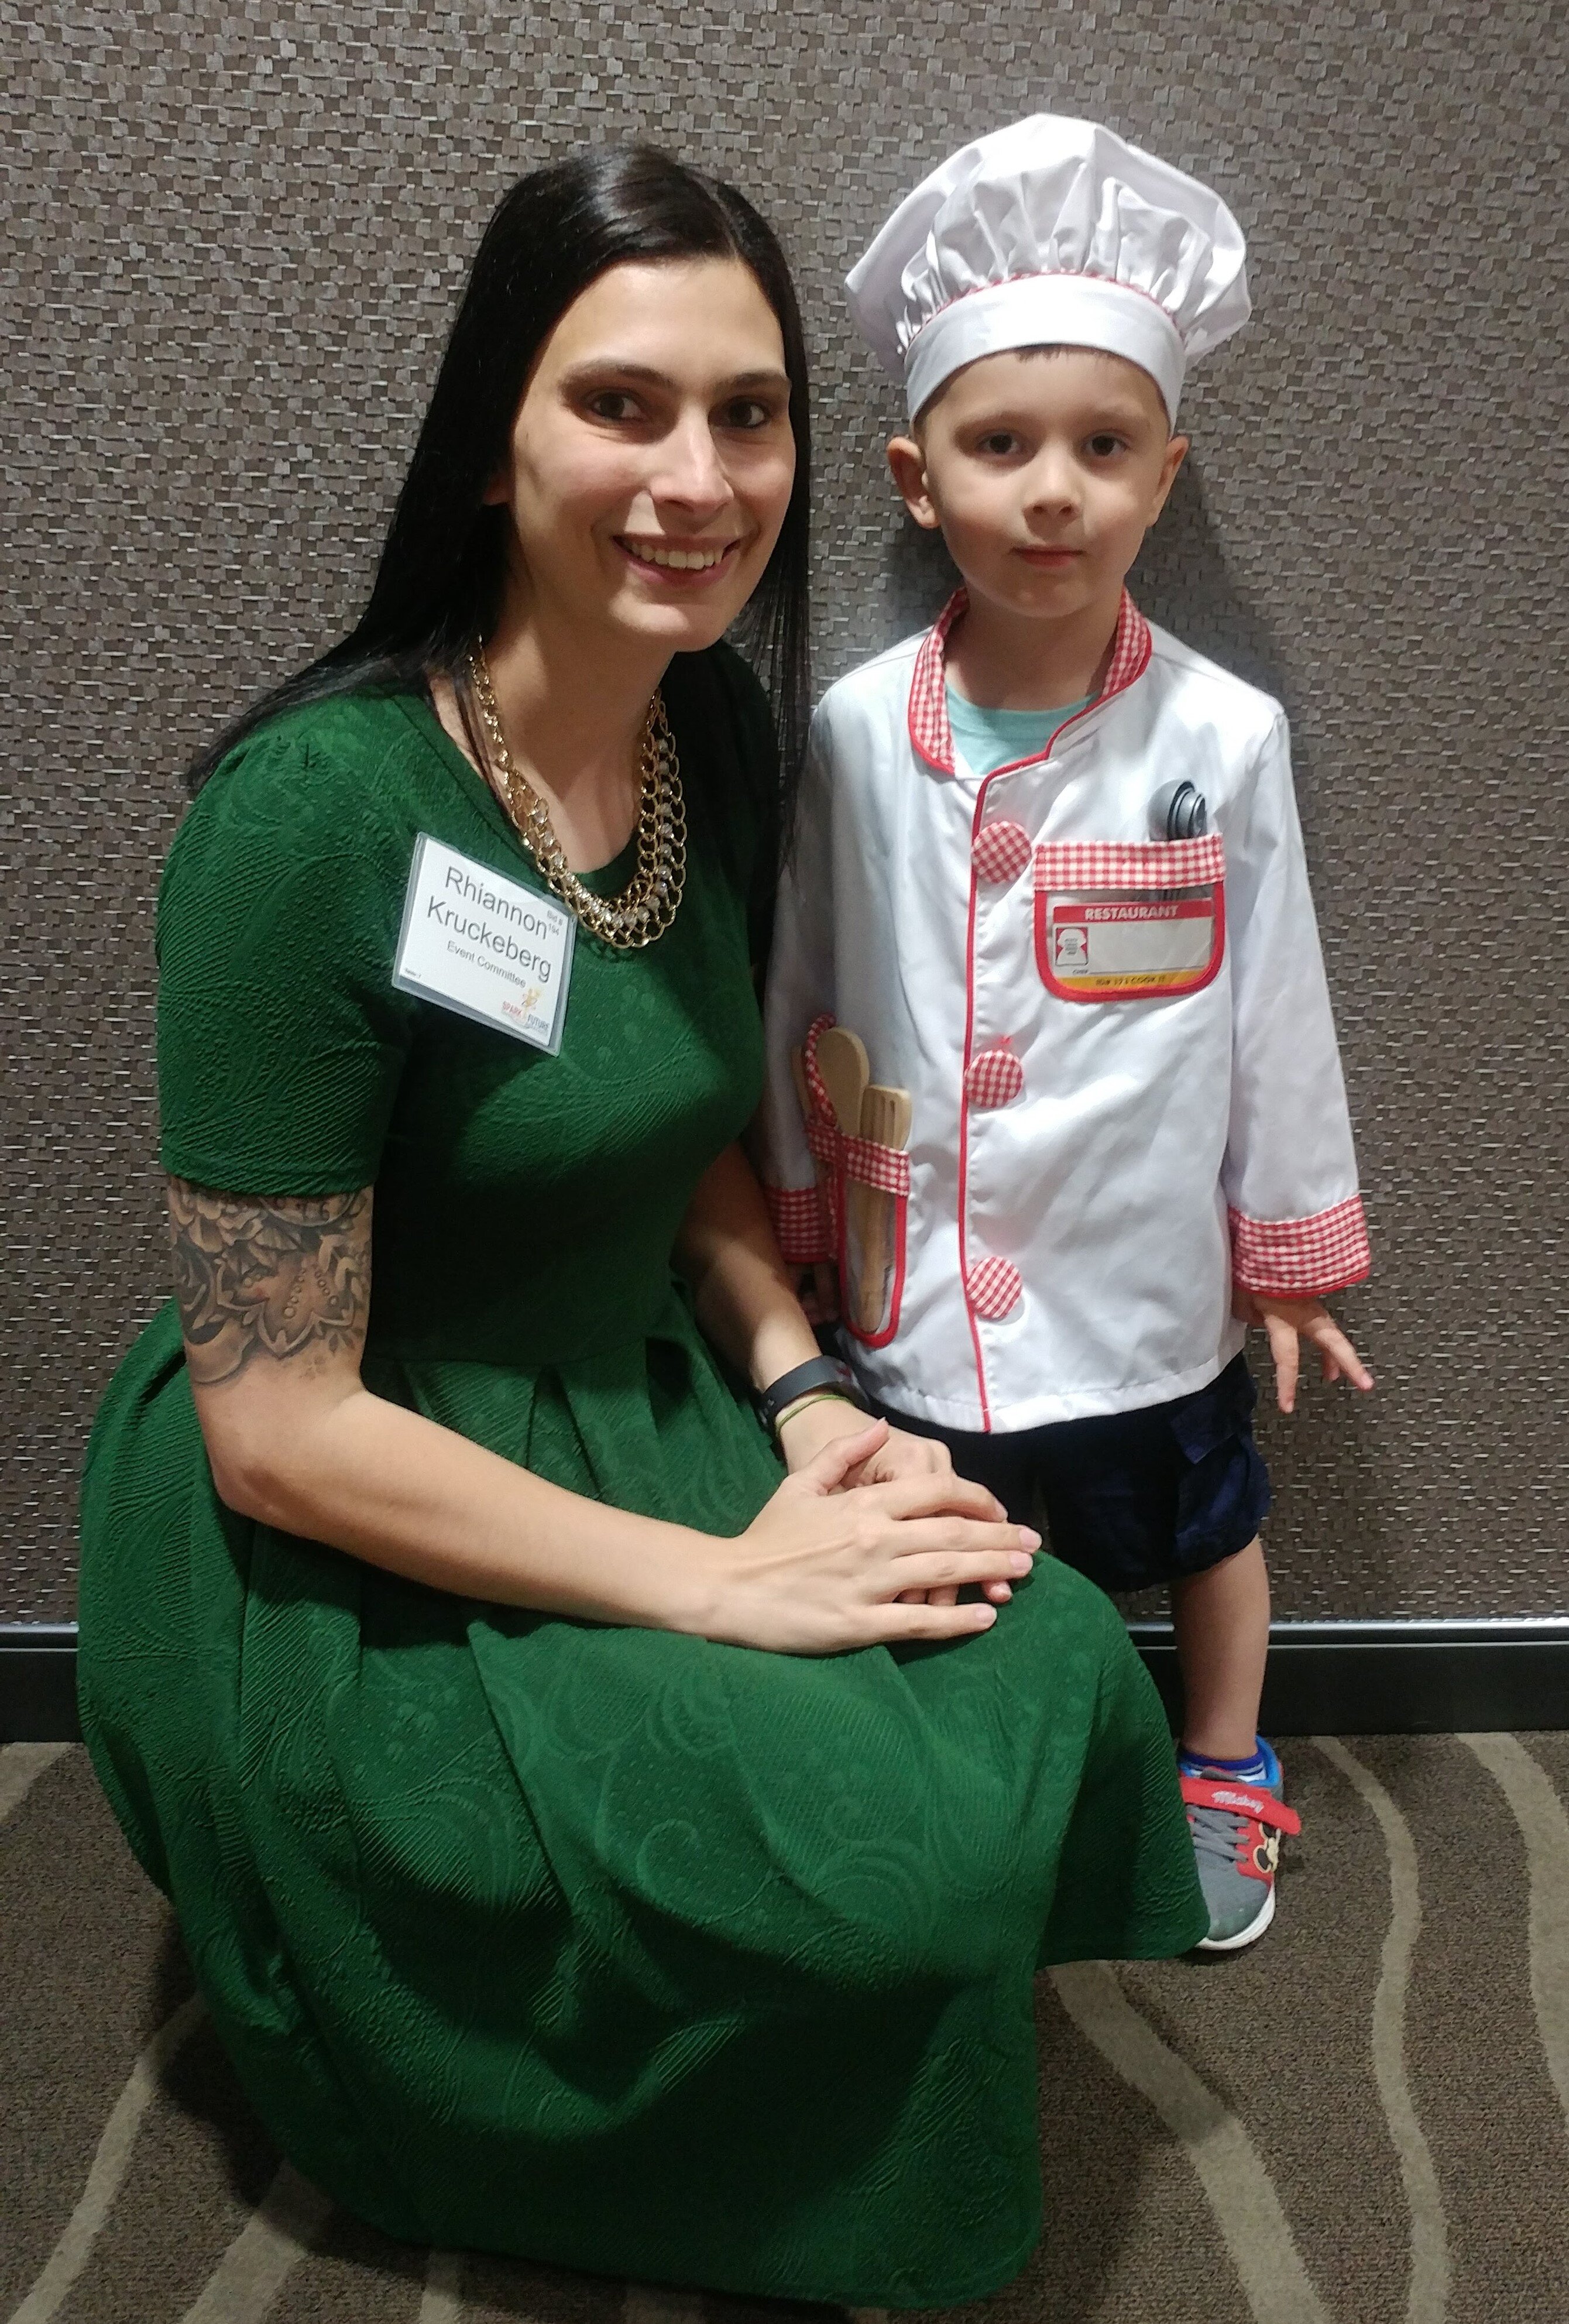 Rhiannon served on the local Early Childhood Alliance planning committee for the “Spark a Future: Invest in our Workforce” fundraiser. Benson, her son, was one of several children in attendance who dressed in costumes reflecting future careers.